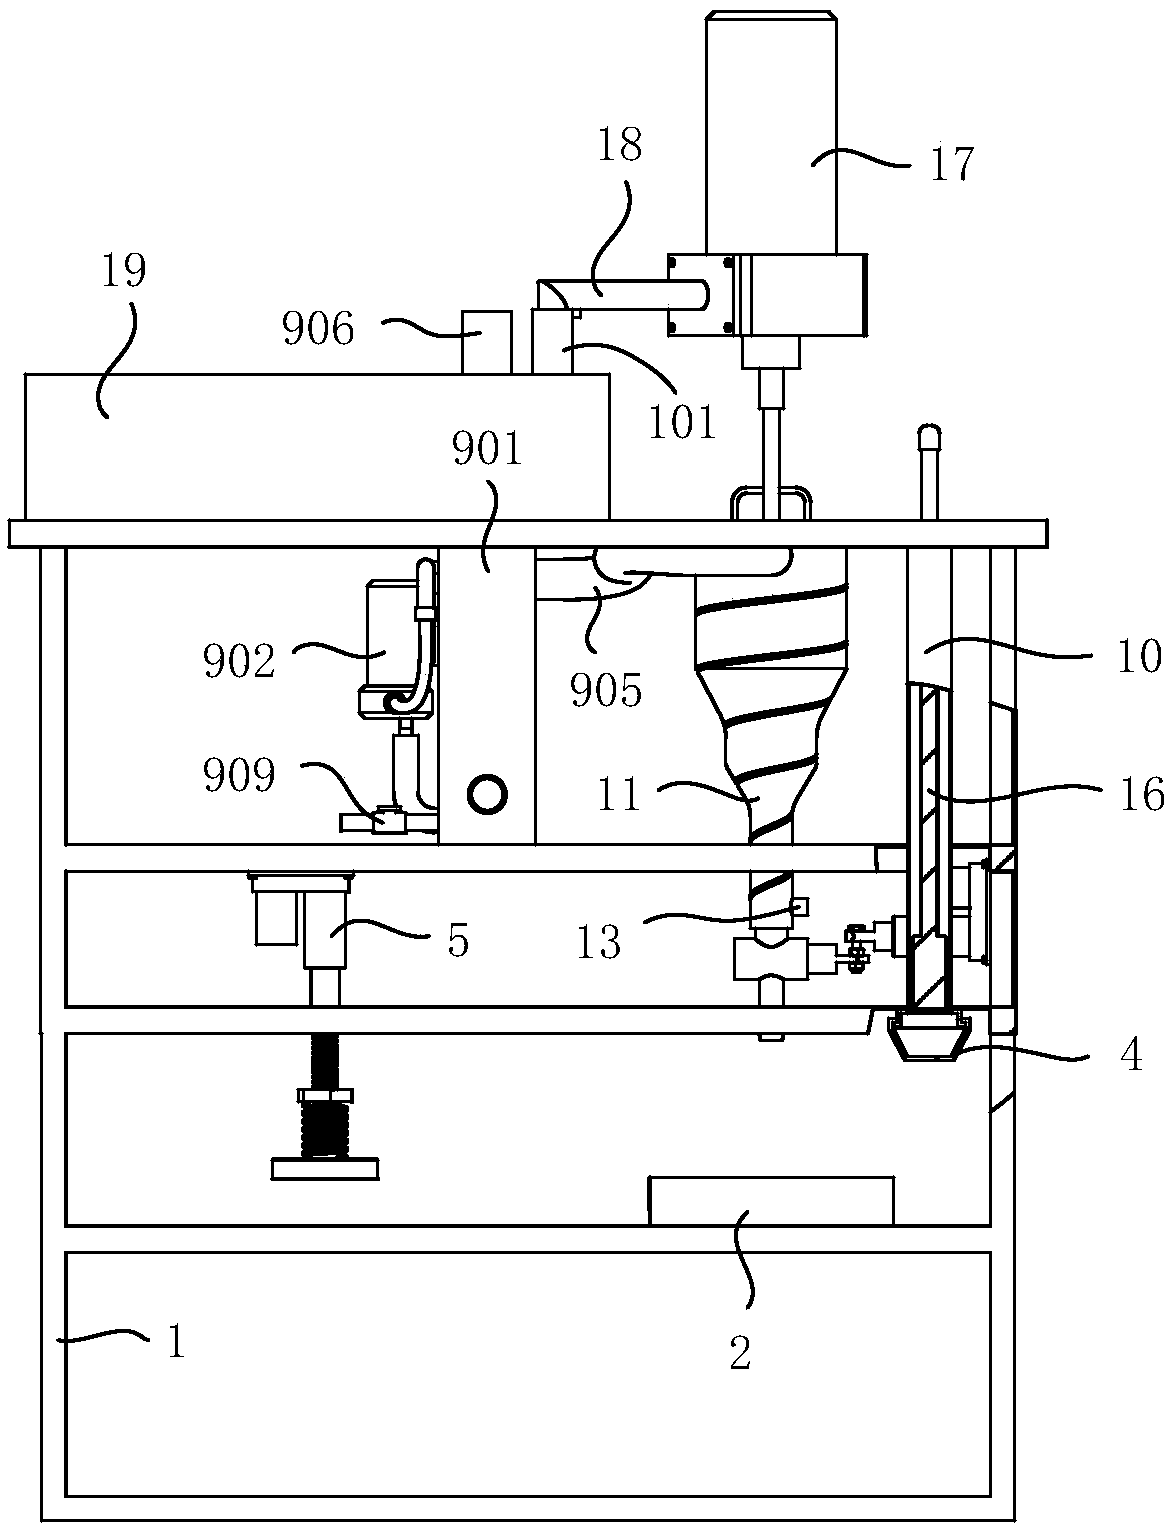 Plaster automatic forming apparatus